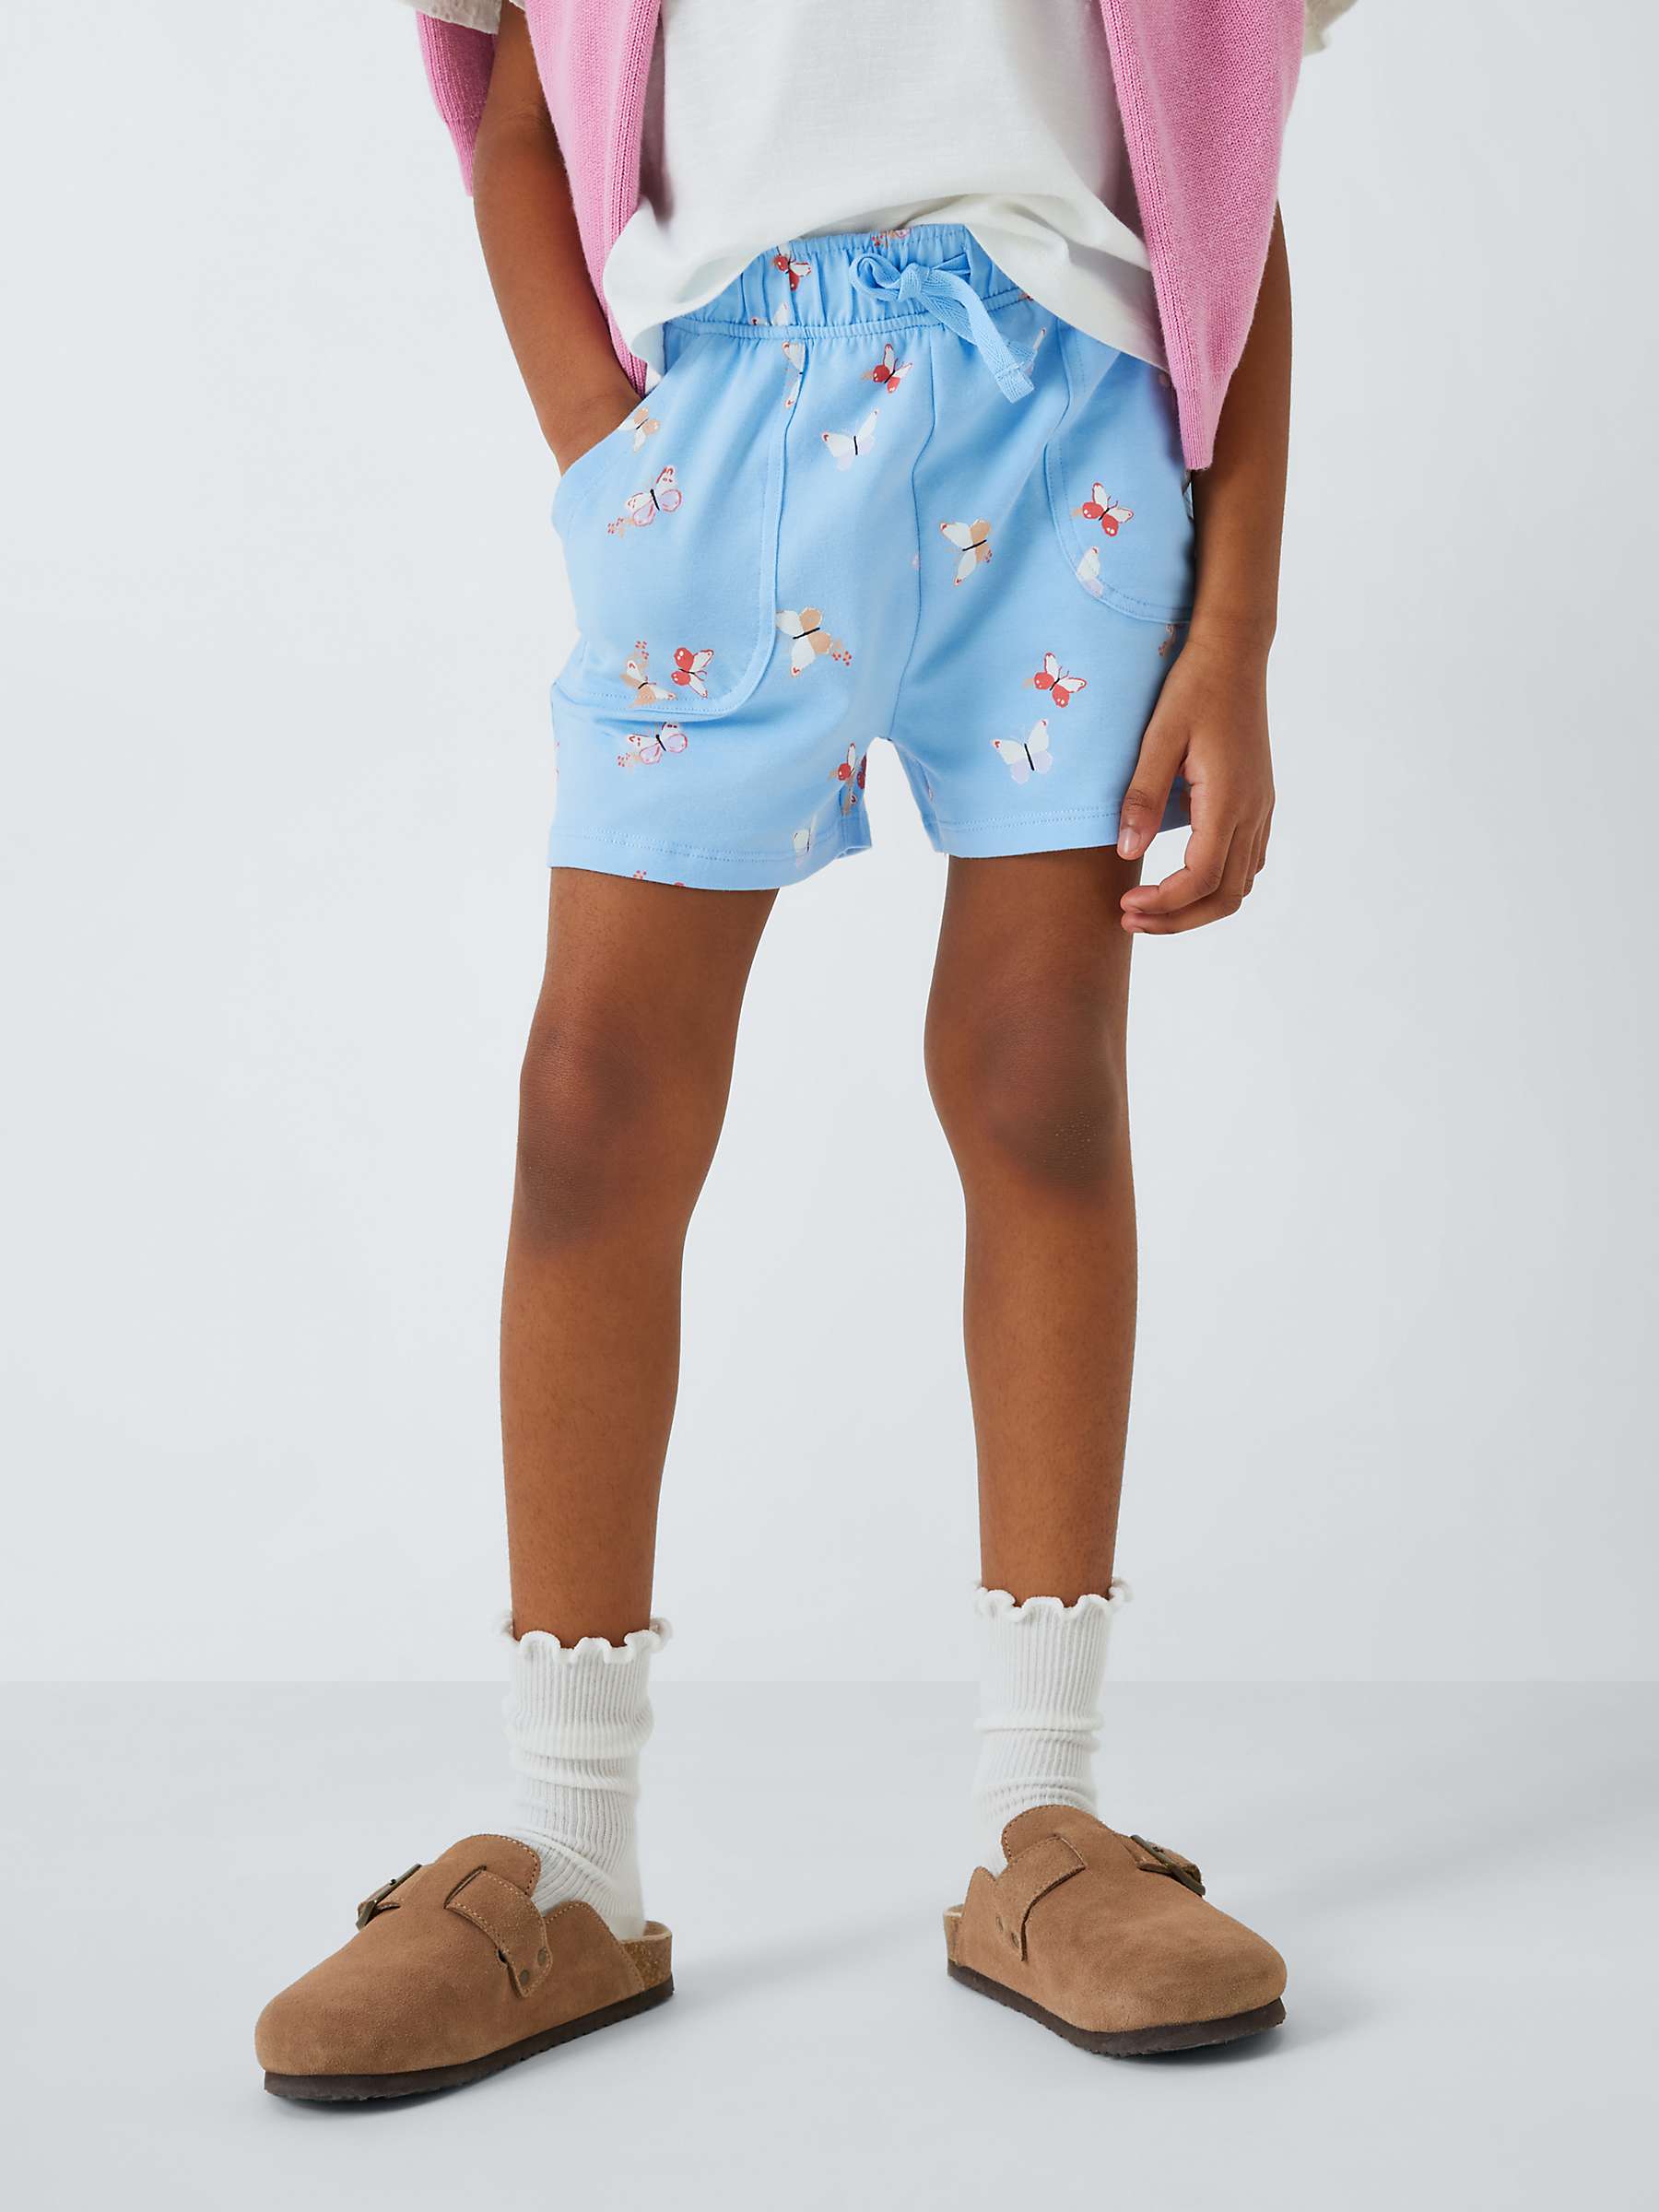 Buy John Lewis Kids' Jersey Plain/Butterfly Shorts, Pack of 2, Multi Online at johnlewis.com